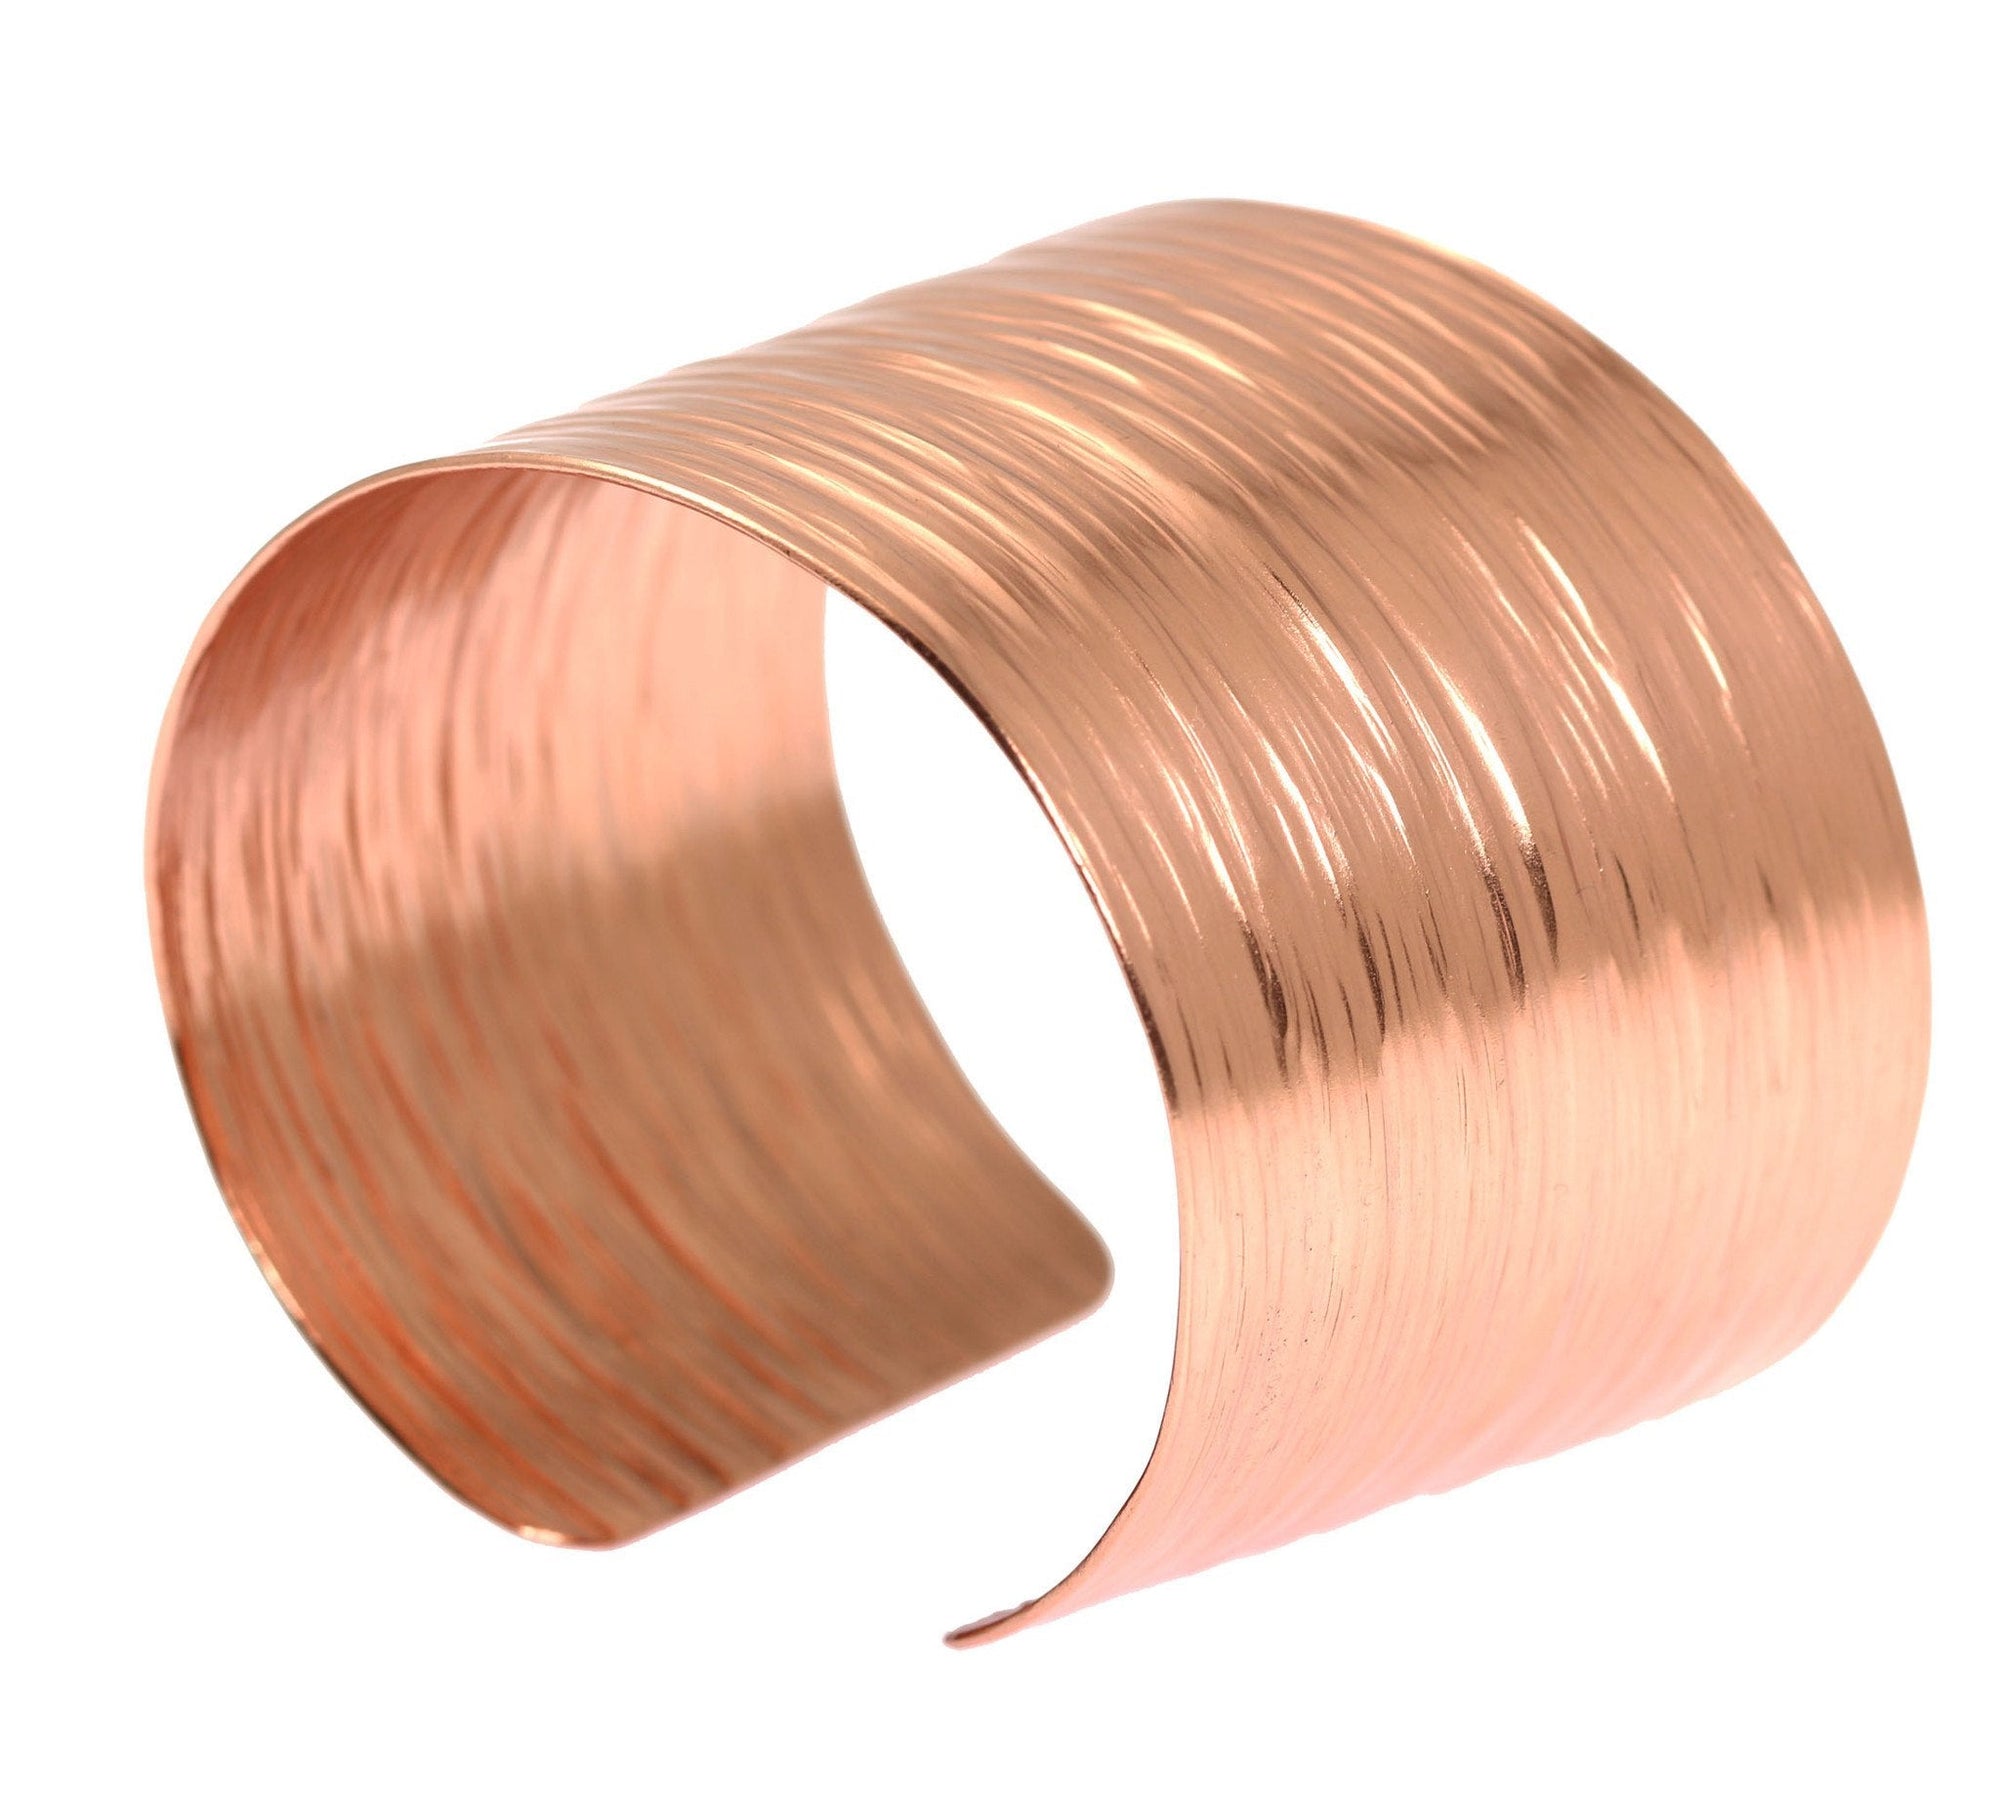 Detailed View of Chased Copper Bark Cuff Bracelet